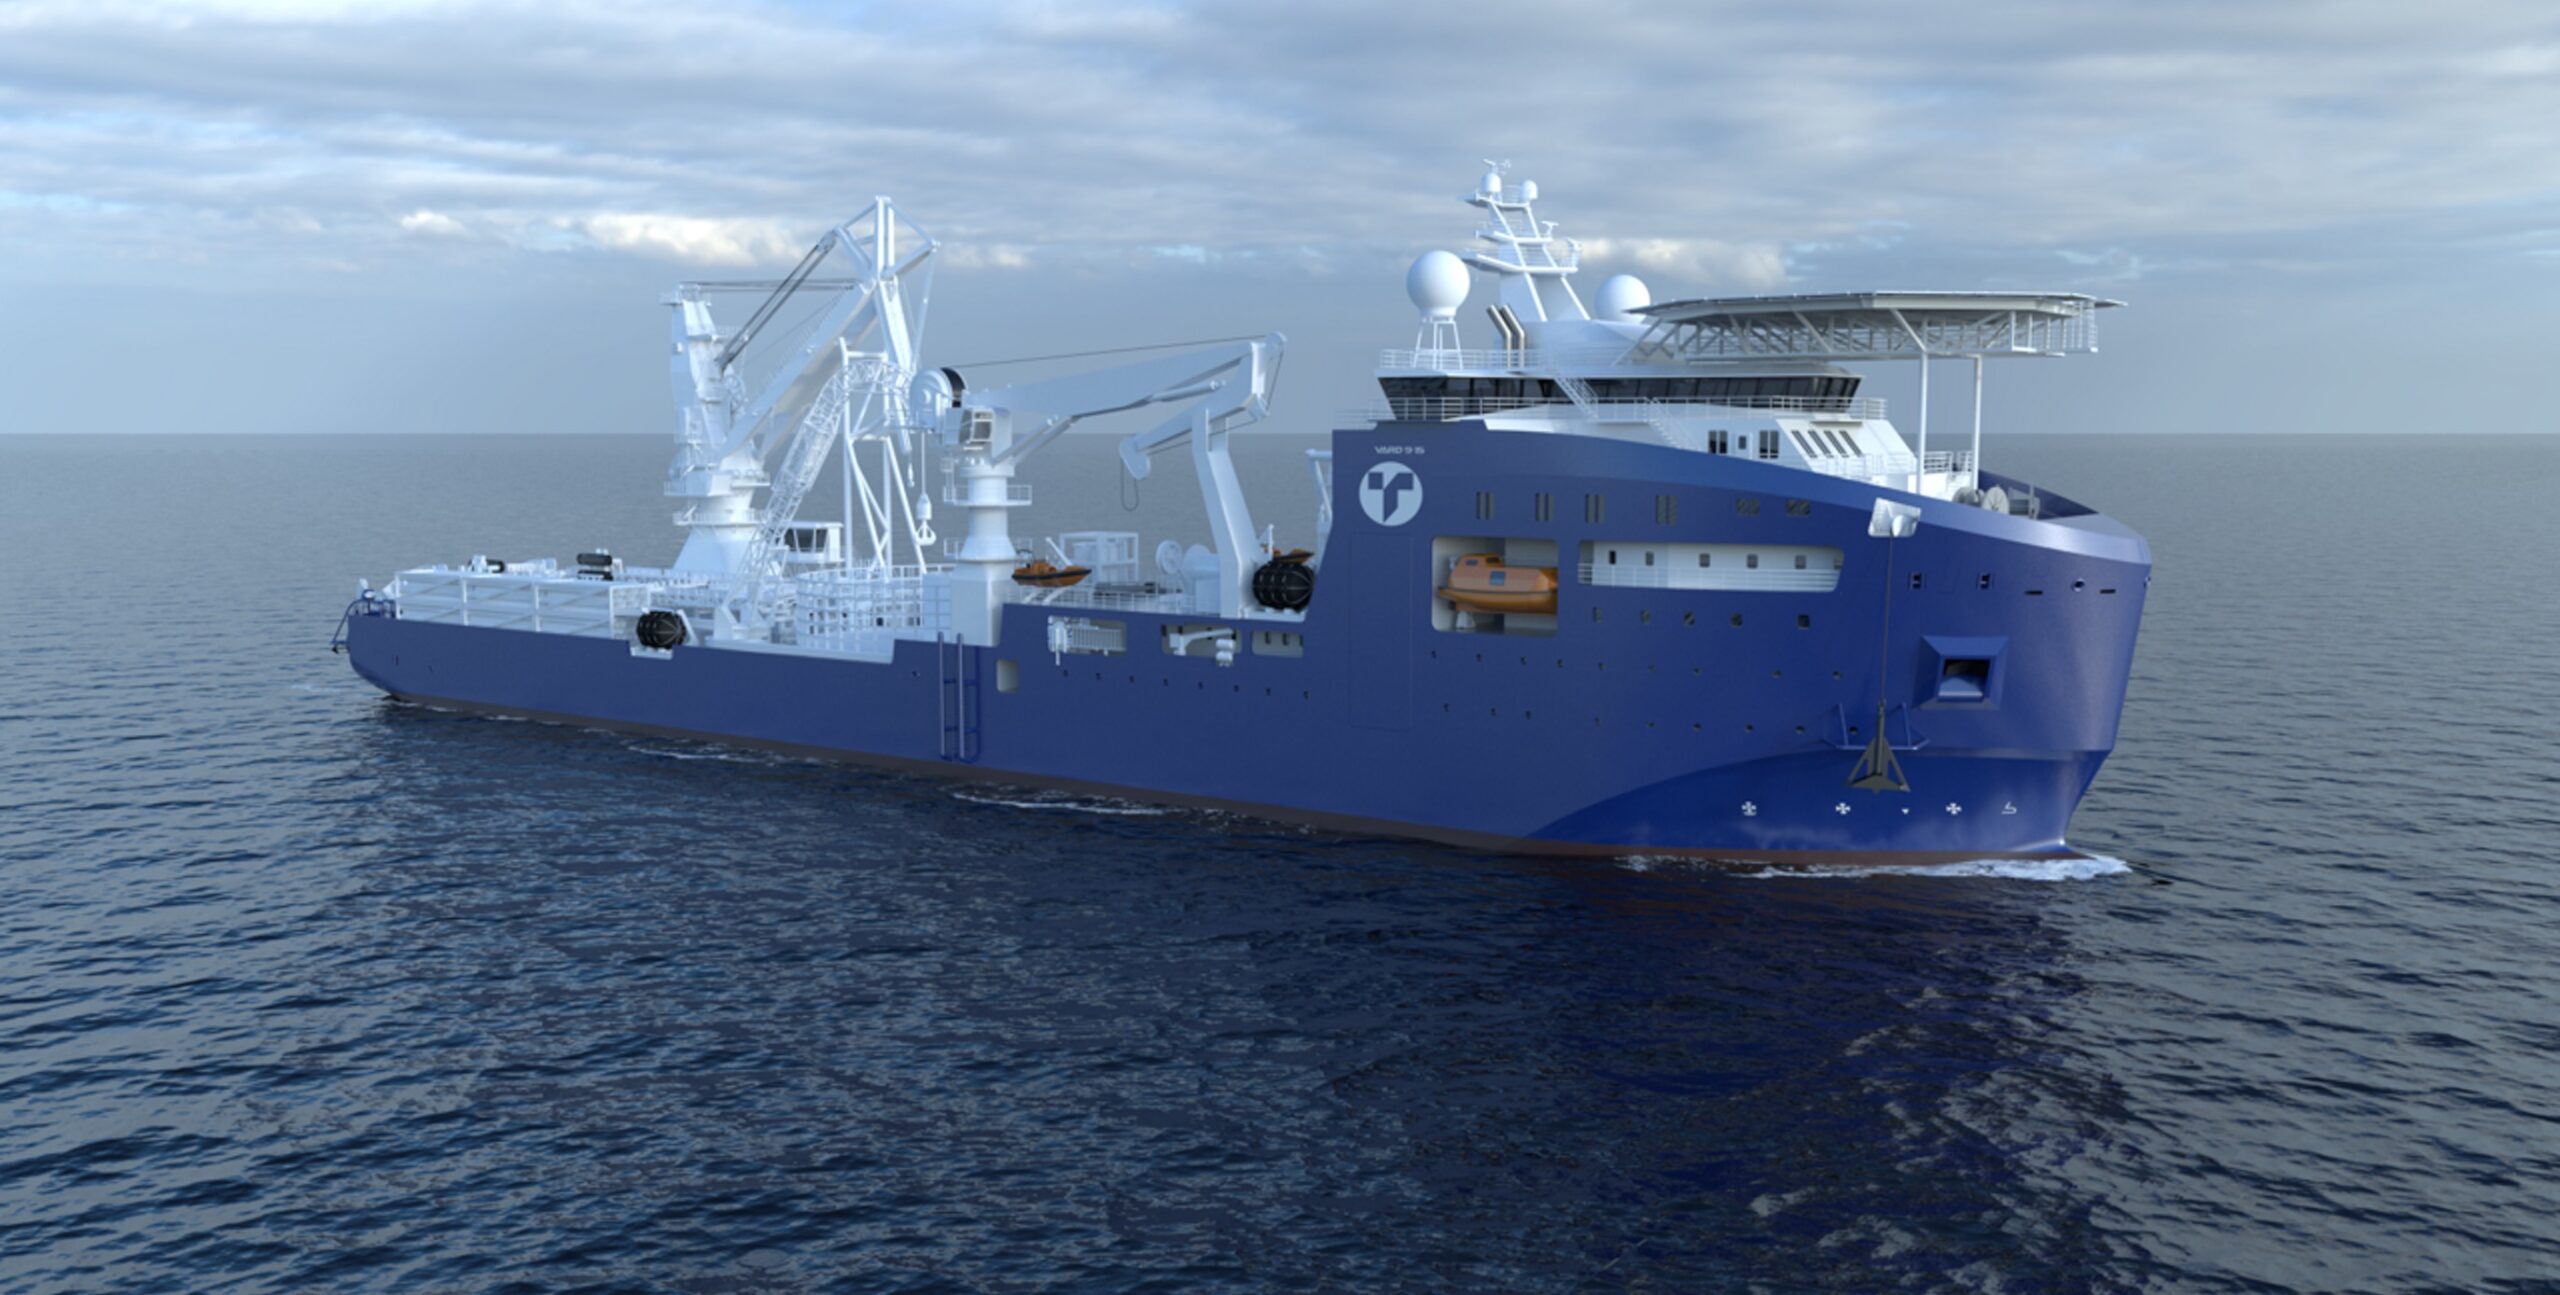 An illustration for the VARD 9 15 design cable layer and construction vessel for Toyo Construction. Image courtesy VARD